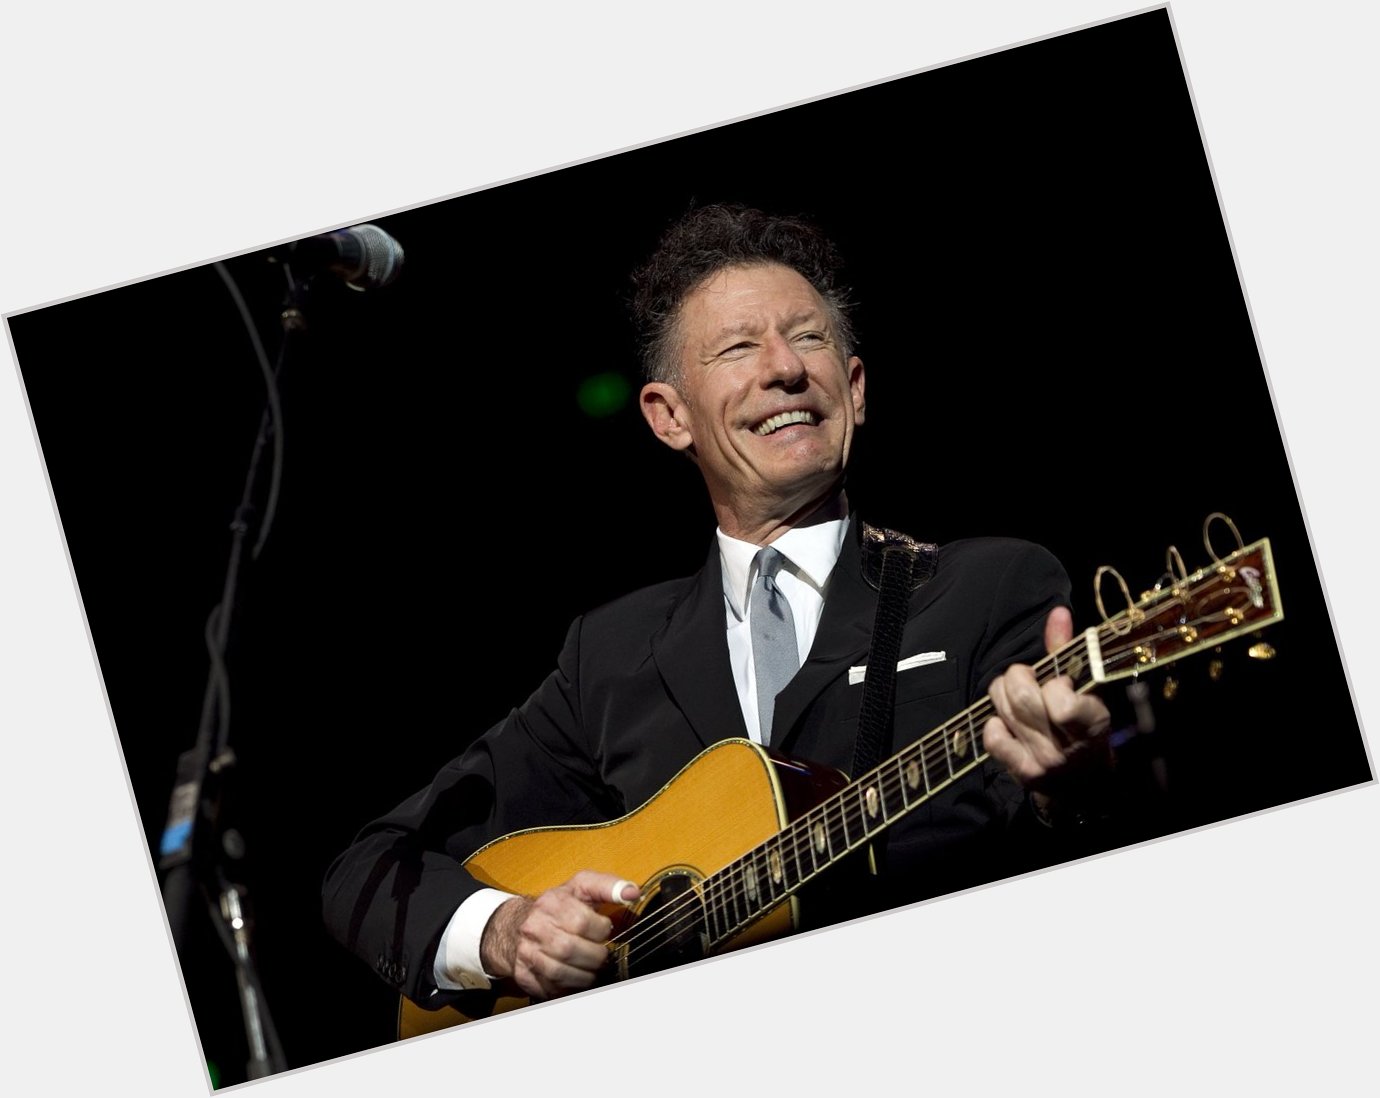 Happy 58 birthday, Lyle Lovett! A Texas legend. Your favorite LL song? 